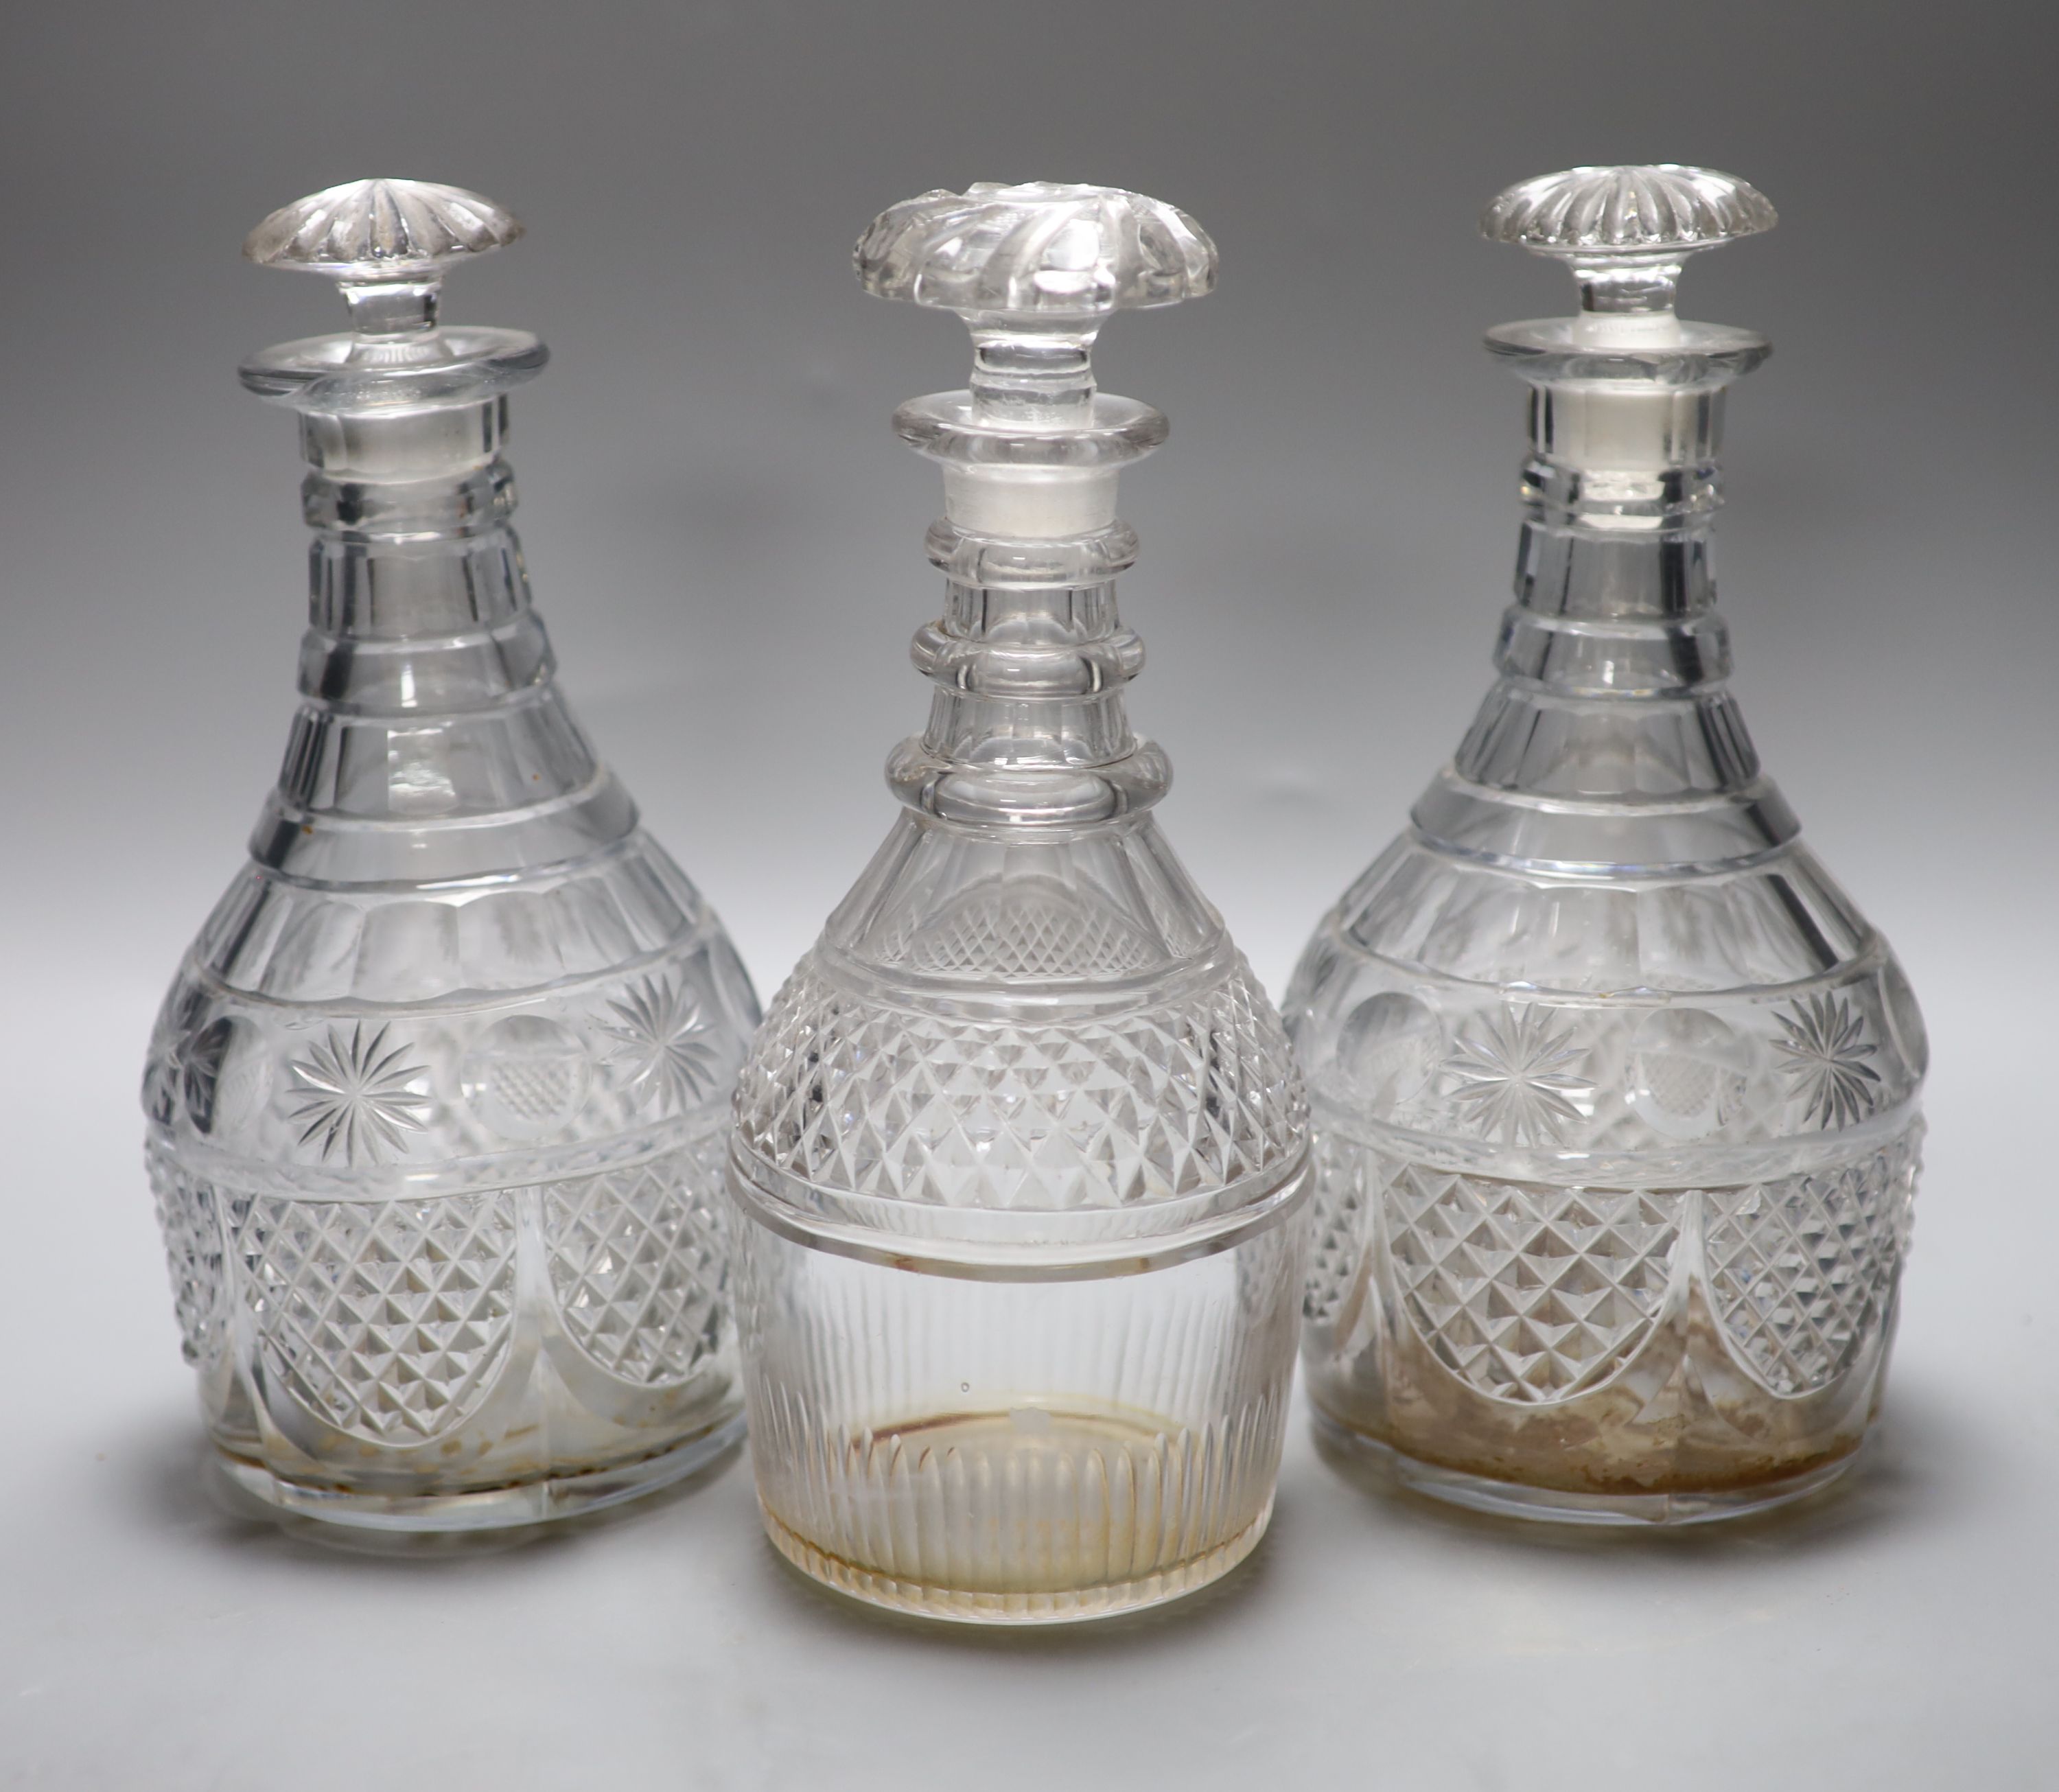 A pair of early 19th century cut glass decanters and one other